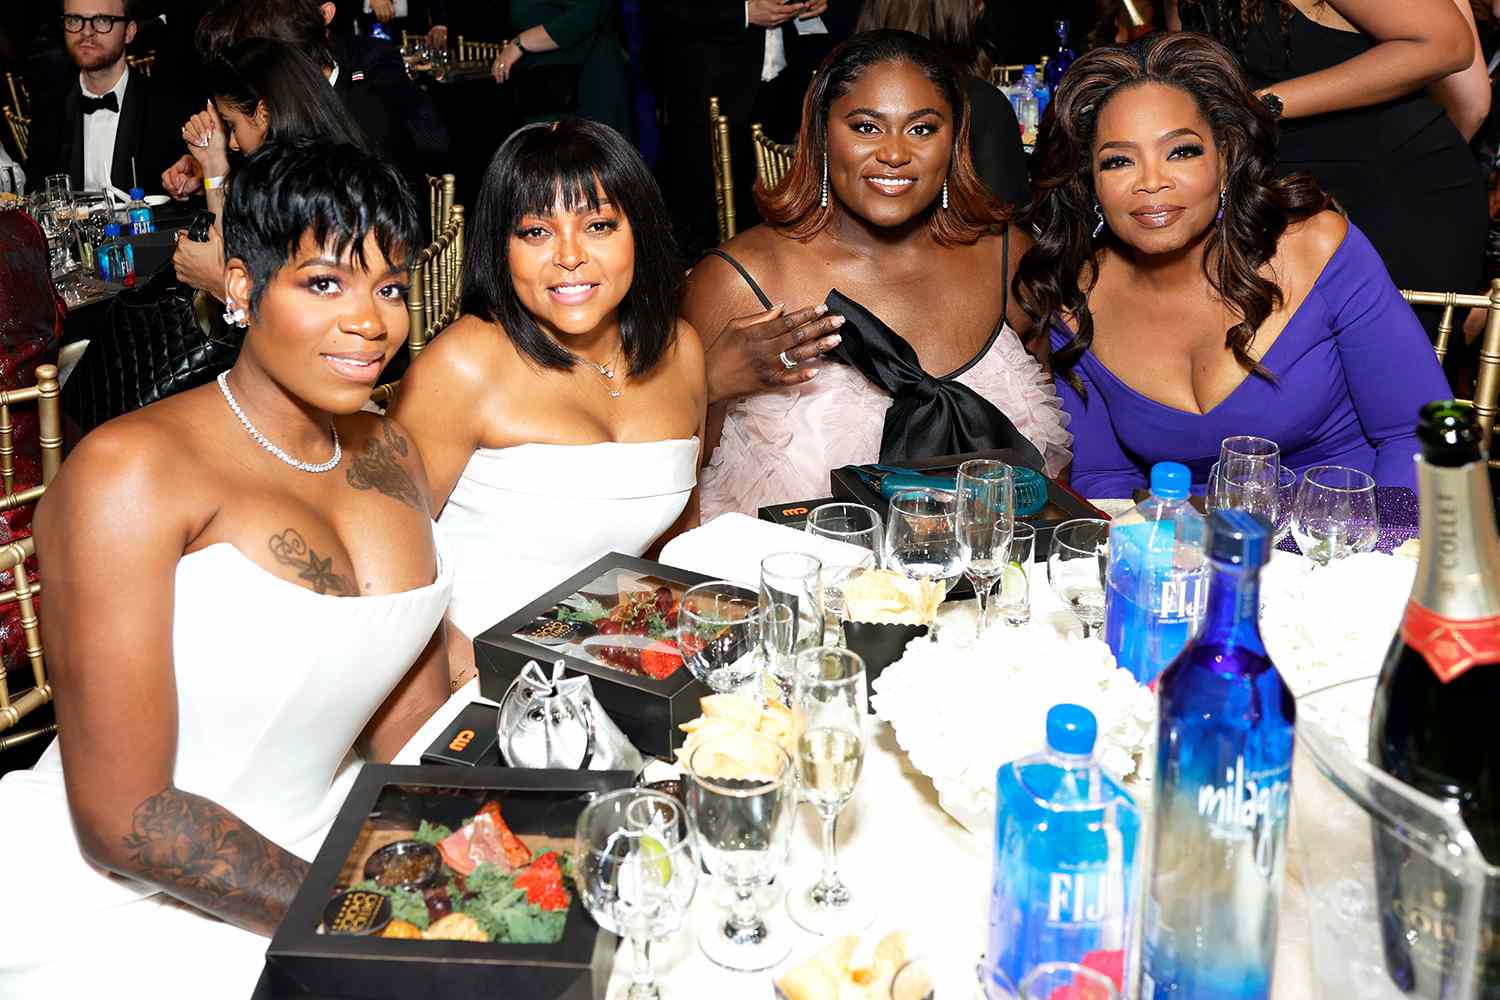 fantasia-barrino-and-others-disapprove-of-bagged-pizza-dinner-at-critics-choice-awards